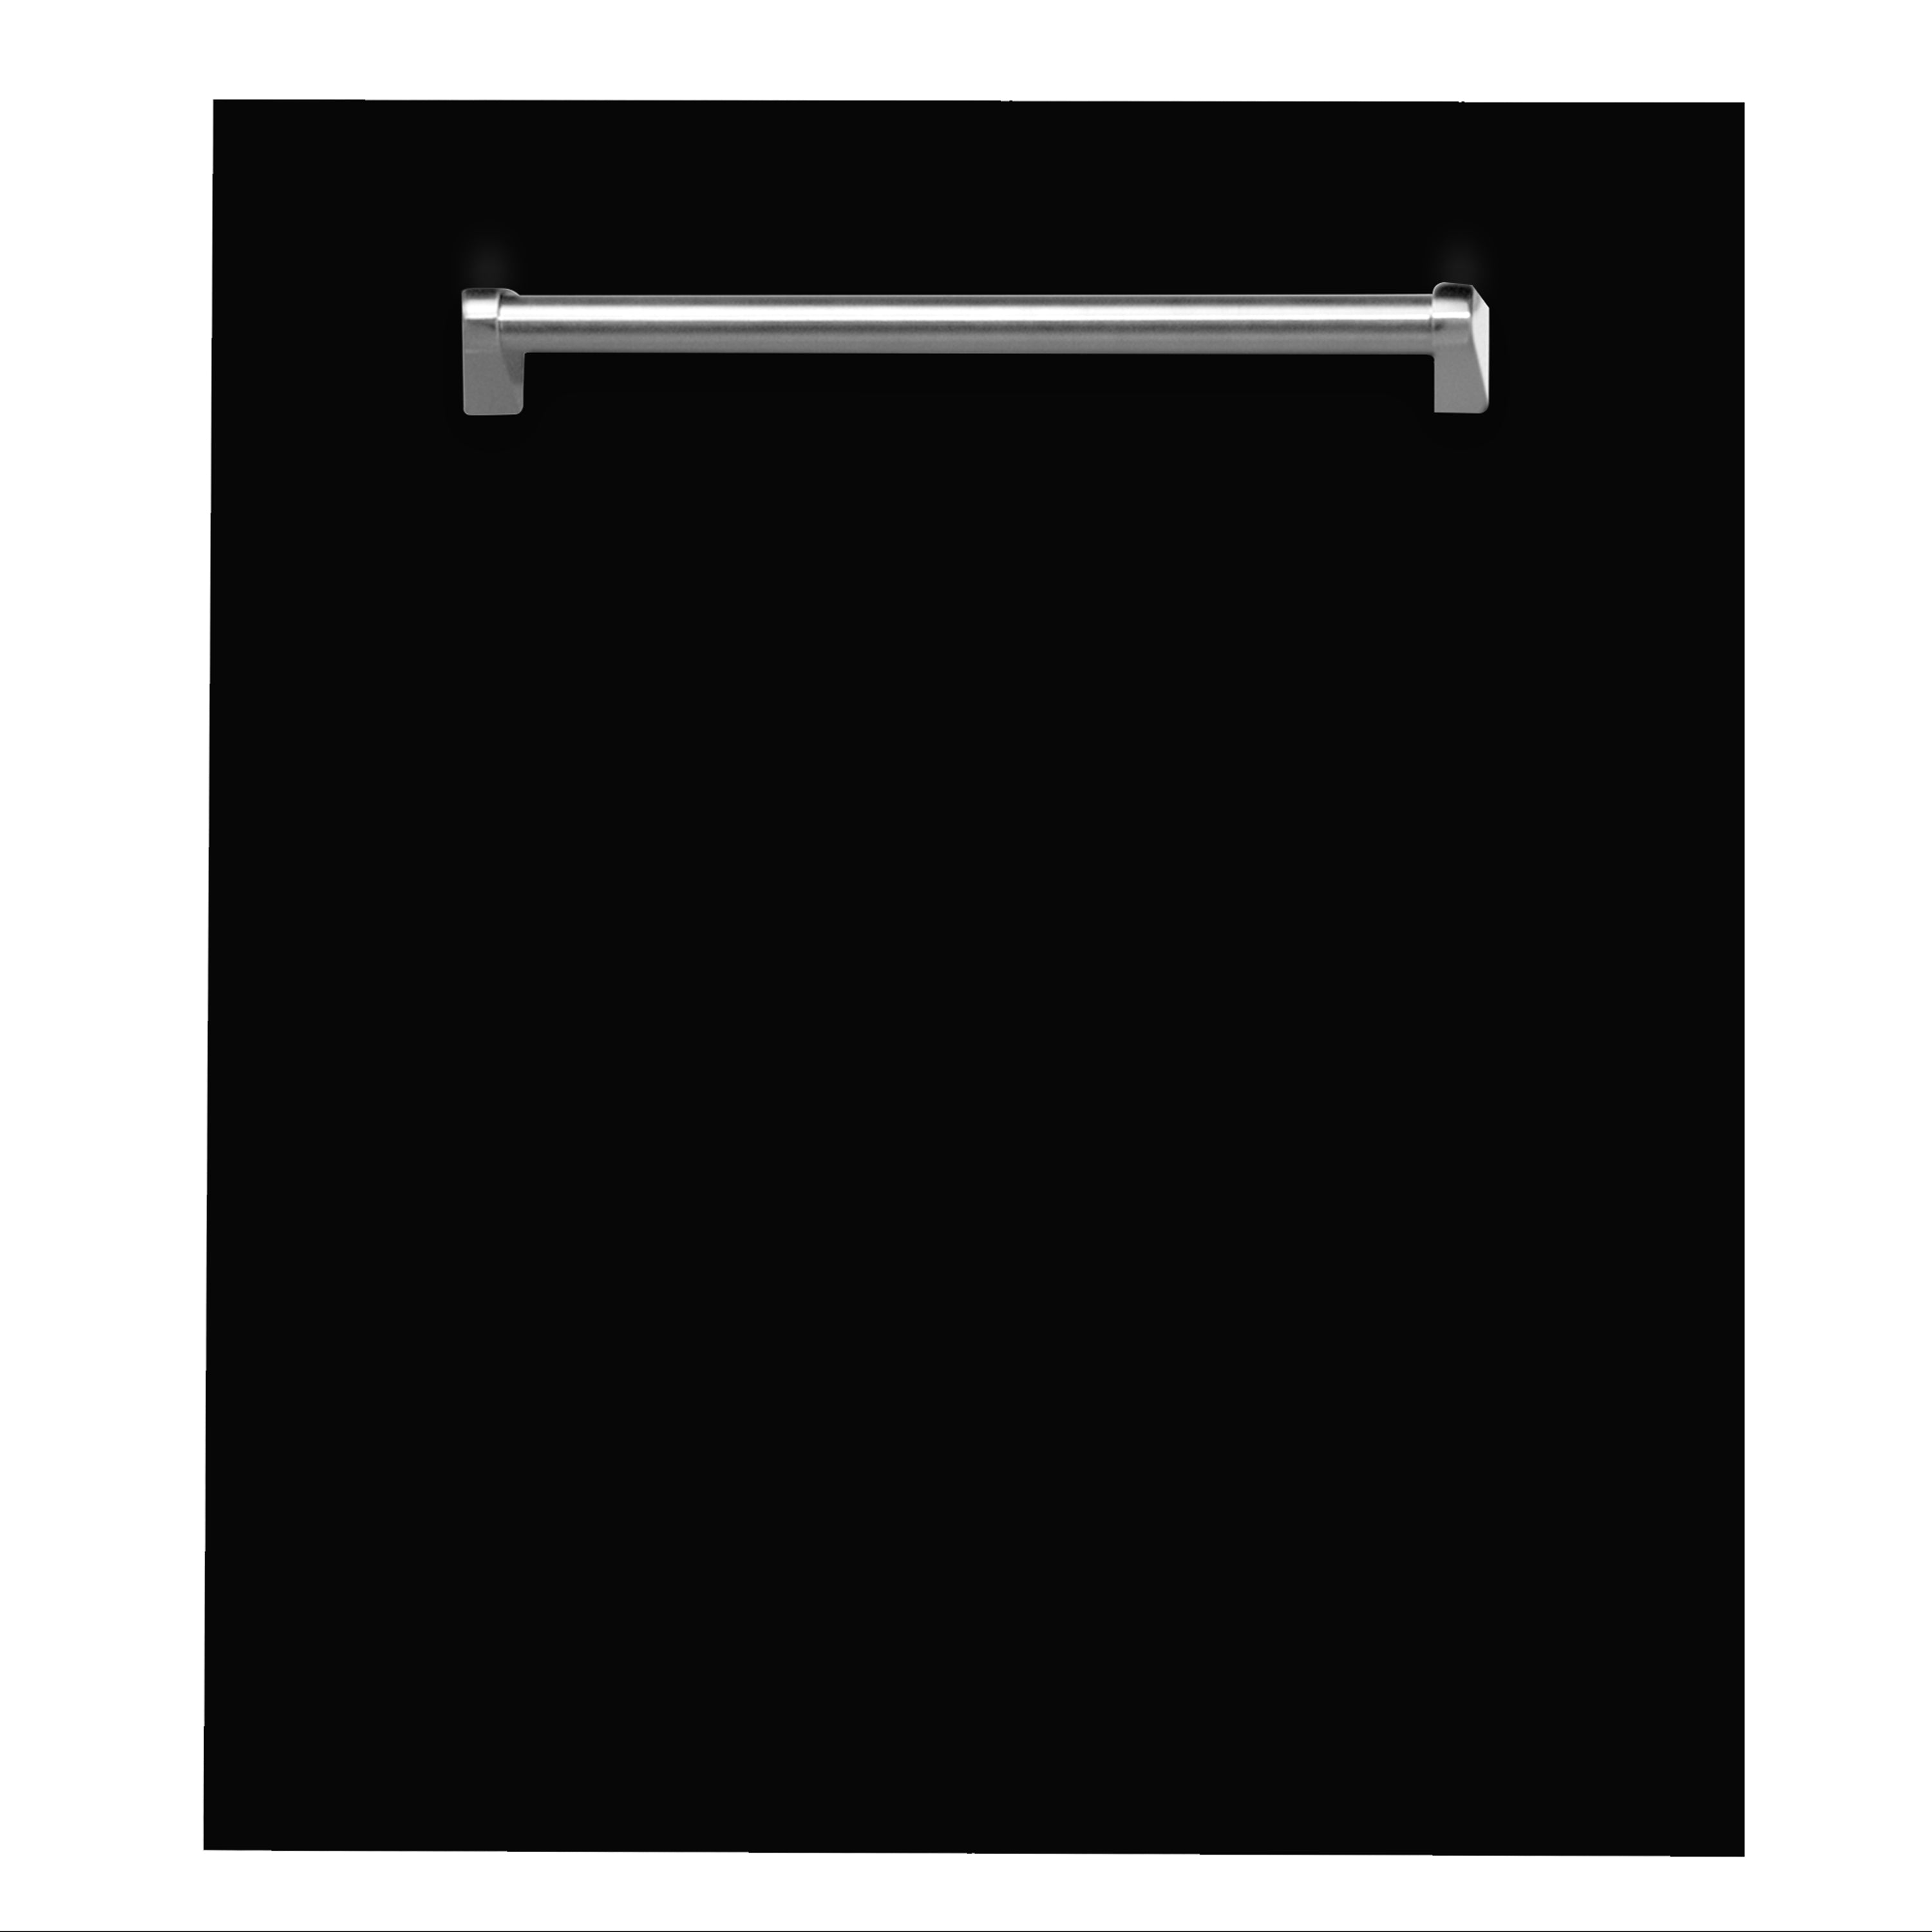 ZLINE 24 in. Top Control Dishwasher with Matte Black Panel and Traditional Style Handle, 52dBa (DW-BLM-24)